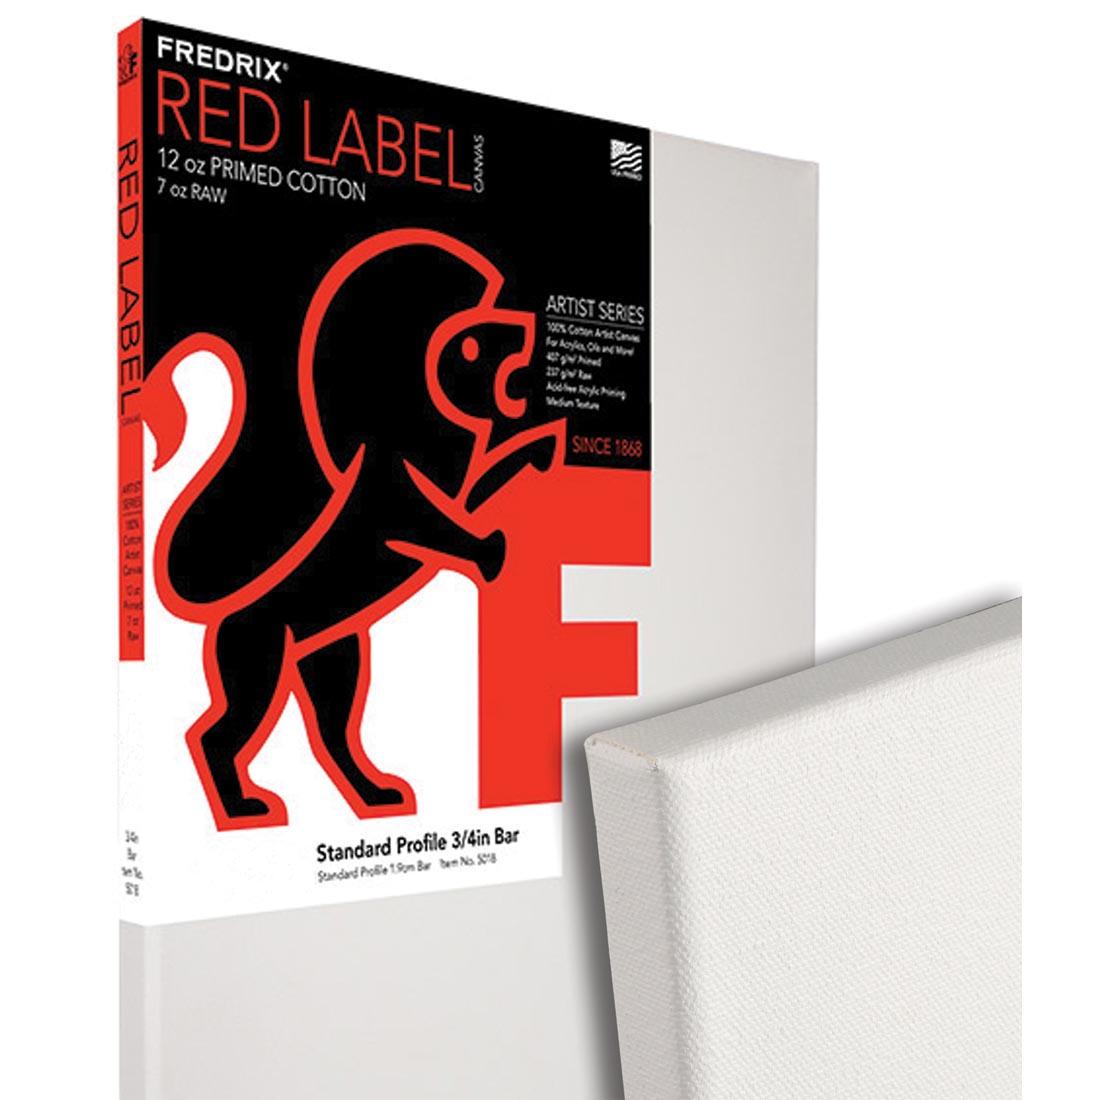 Fredrix Red Label Canvas in package with another canvas' corner overlain